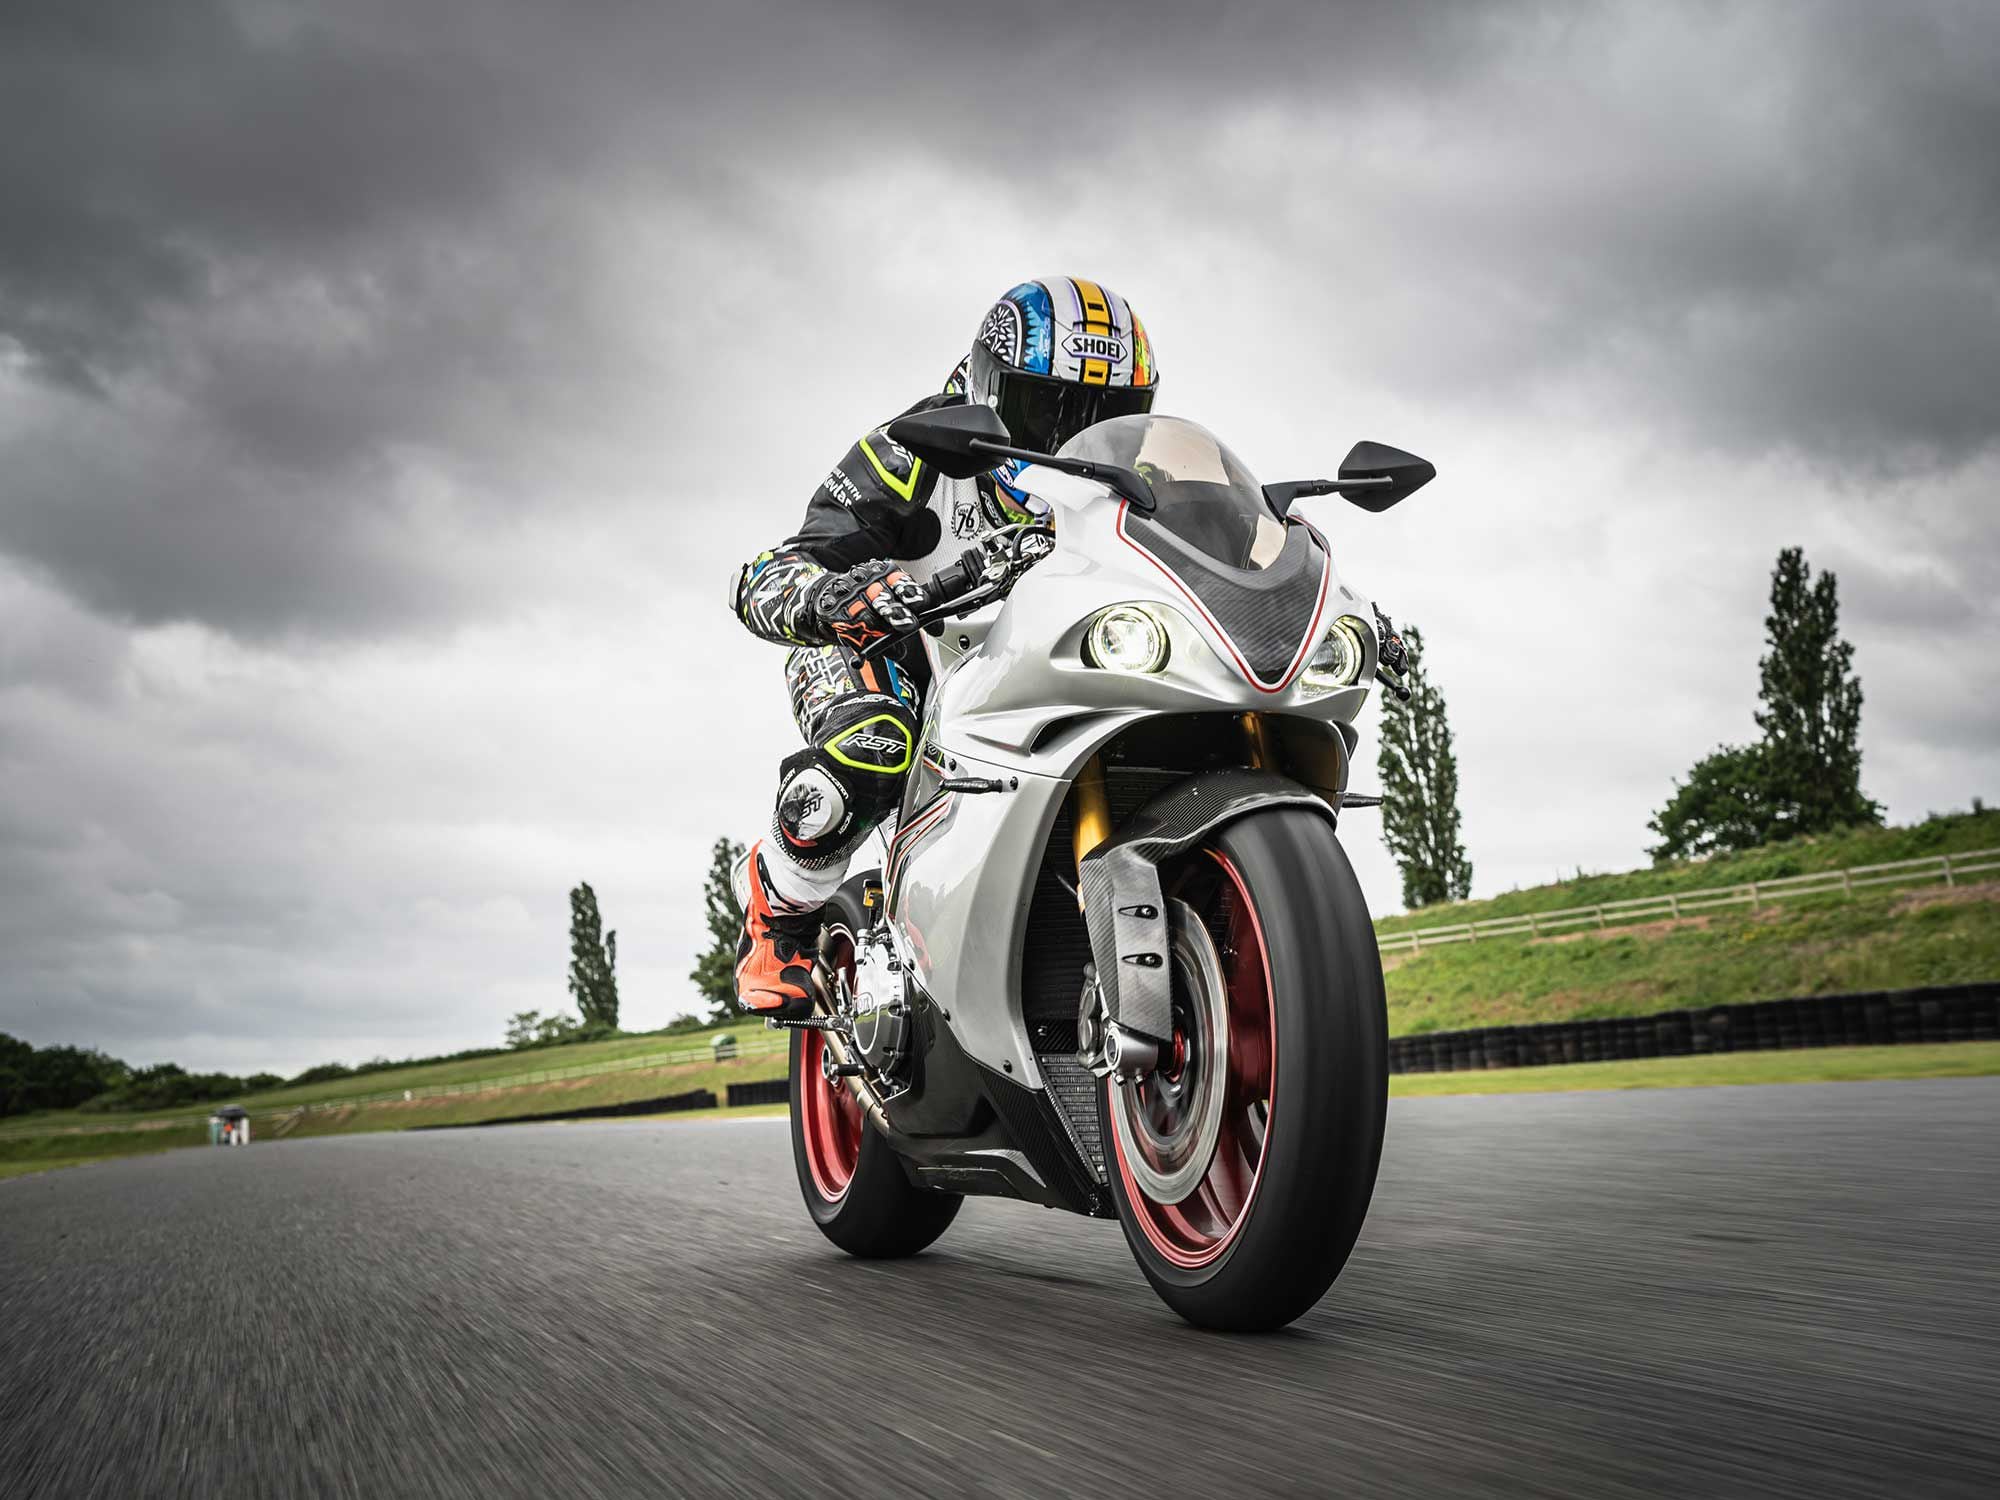 Has Norton risen from the ashes of Stuart Garner’s dumpster fire? The 2022 V4SV superbike suggests it has.